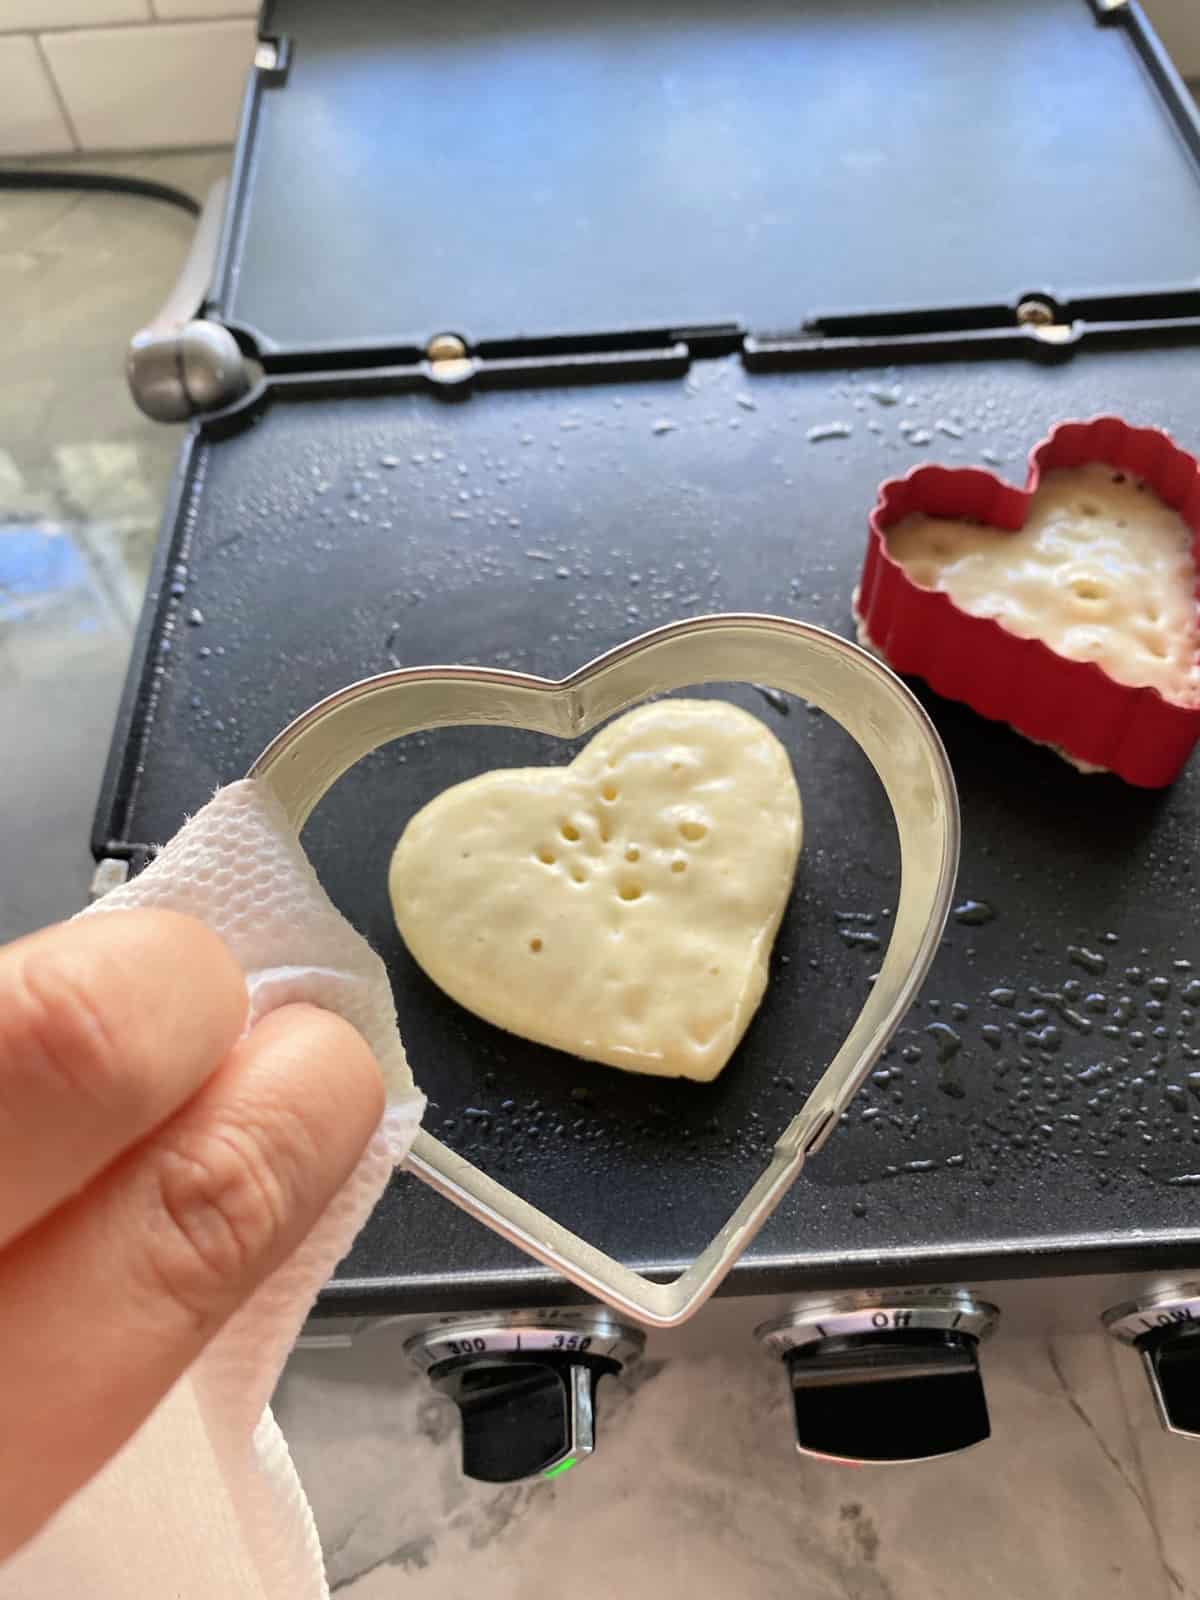 Hand holding a paper towel removing the heart shaped cookie cutter from the griddle.